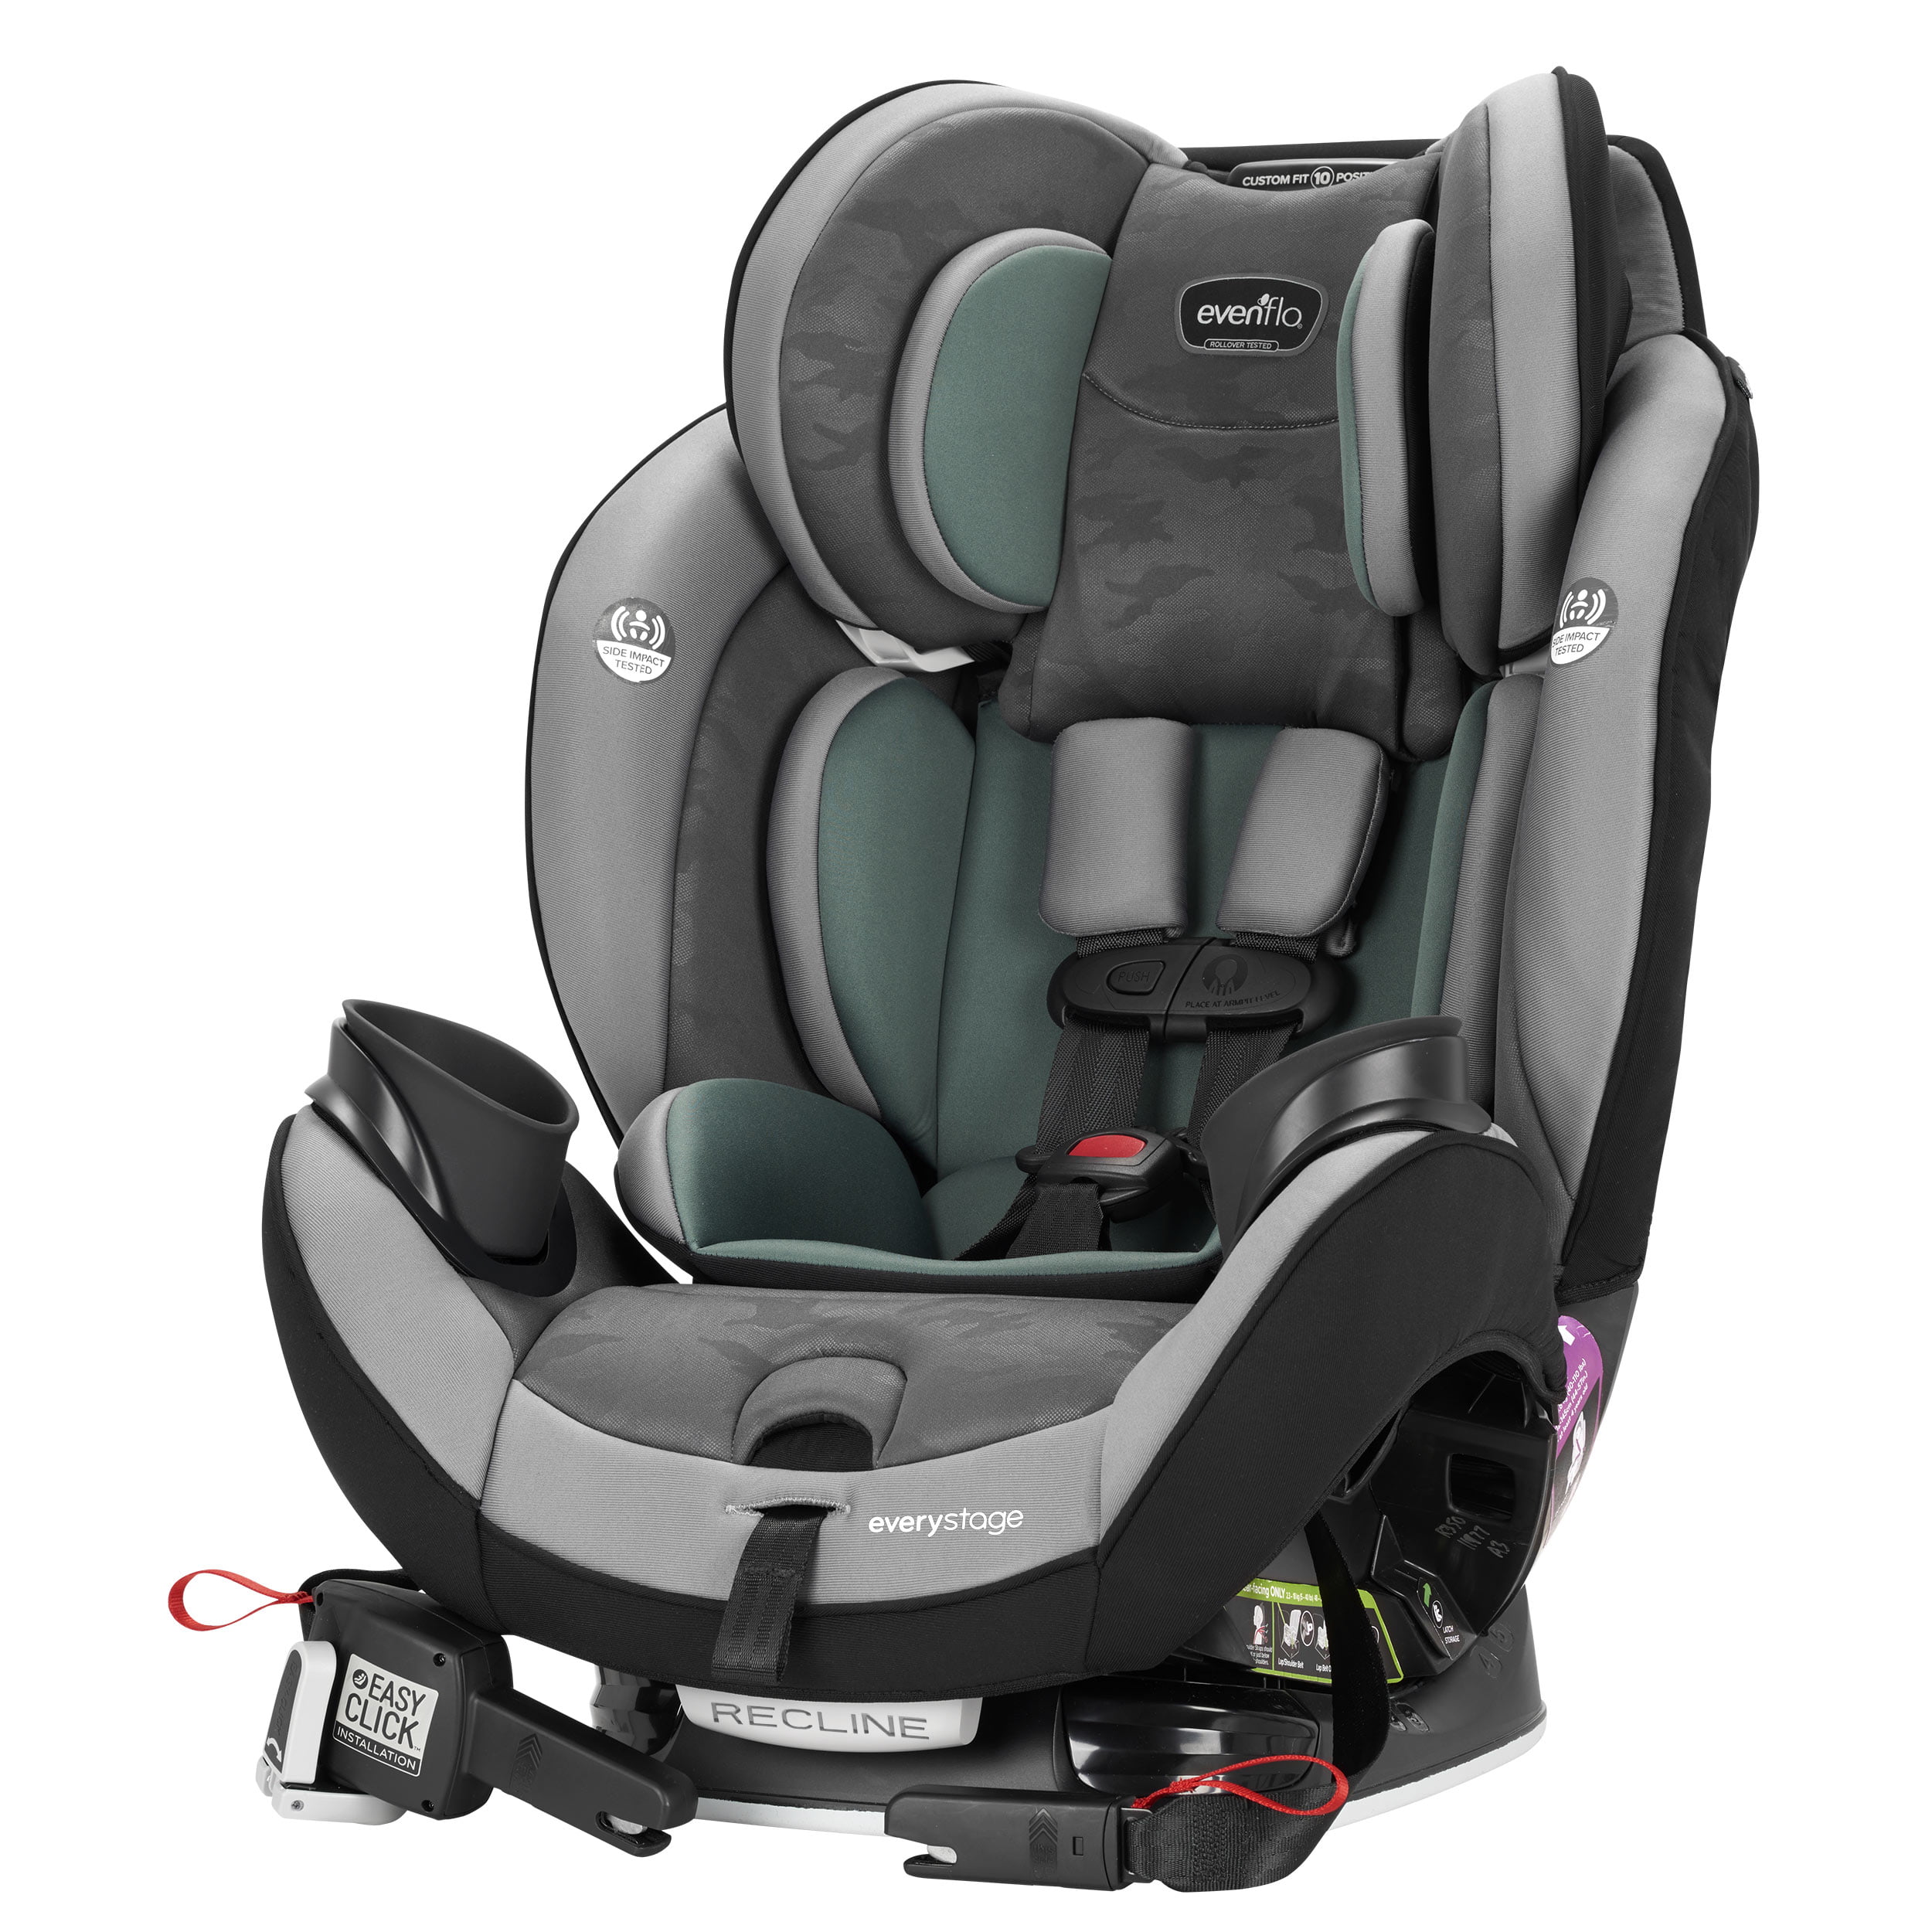 walmart-evenflo-everystage-dlx-all-in-one-car-seat-highlands